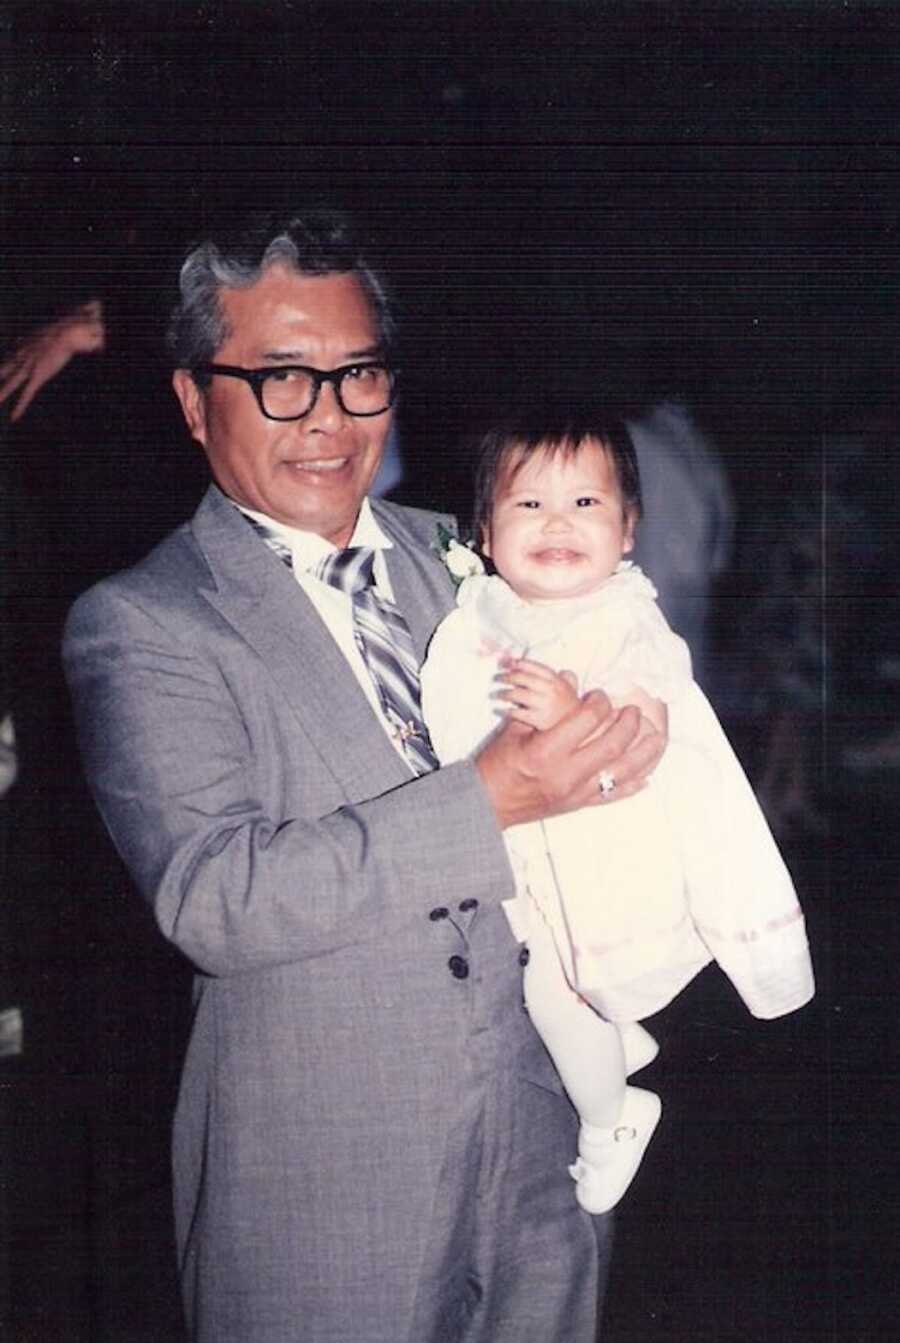 Grandfather holds his grandchild, both are smiling